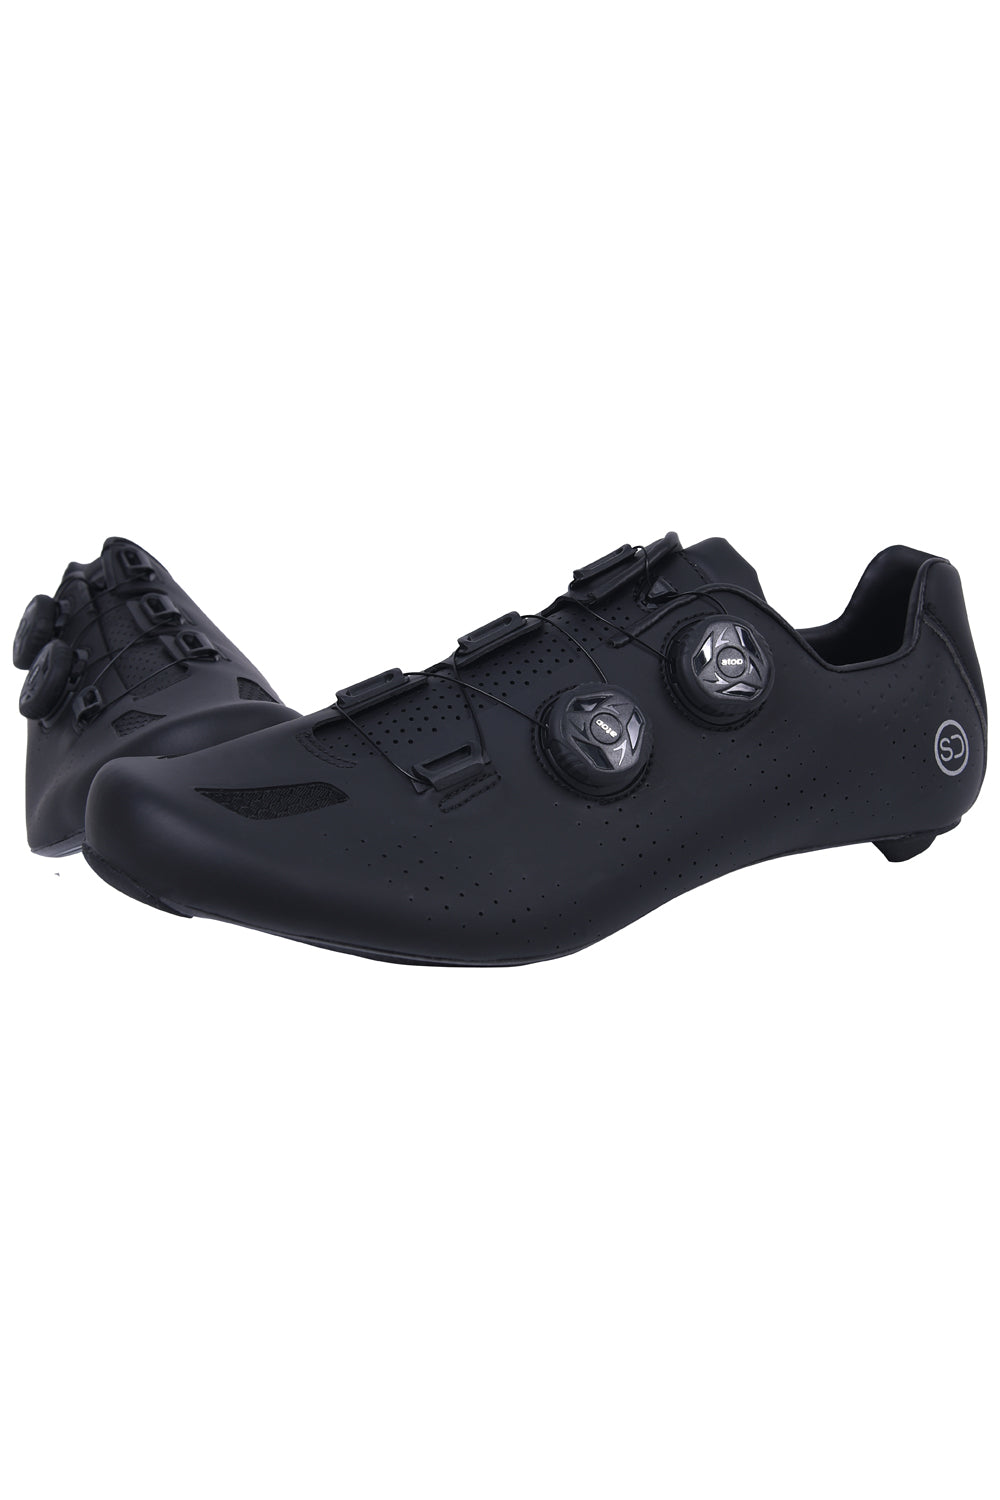 Sundried S-GT1 Carbon Fibre Pro Road Cycle Shoes Cycle Shoes Activewear